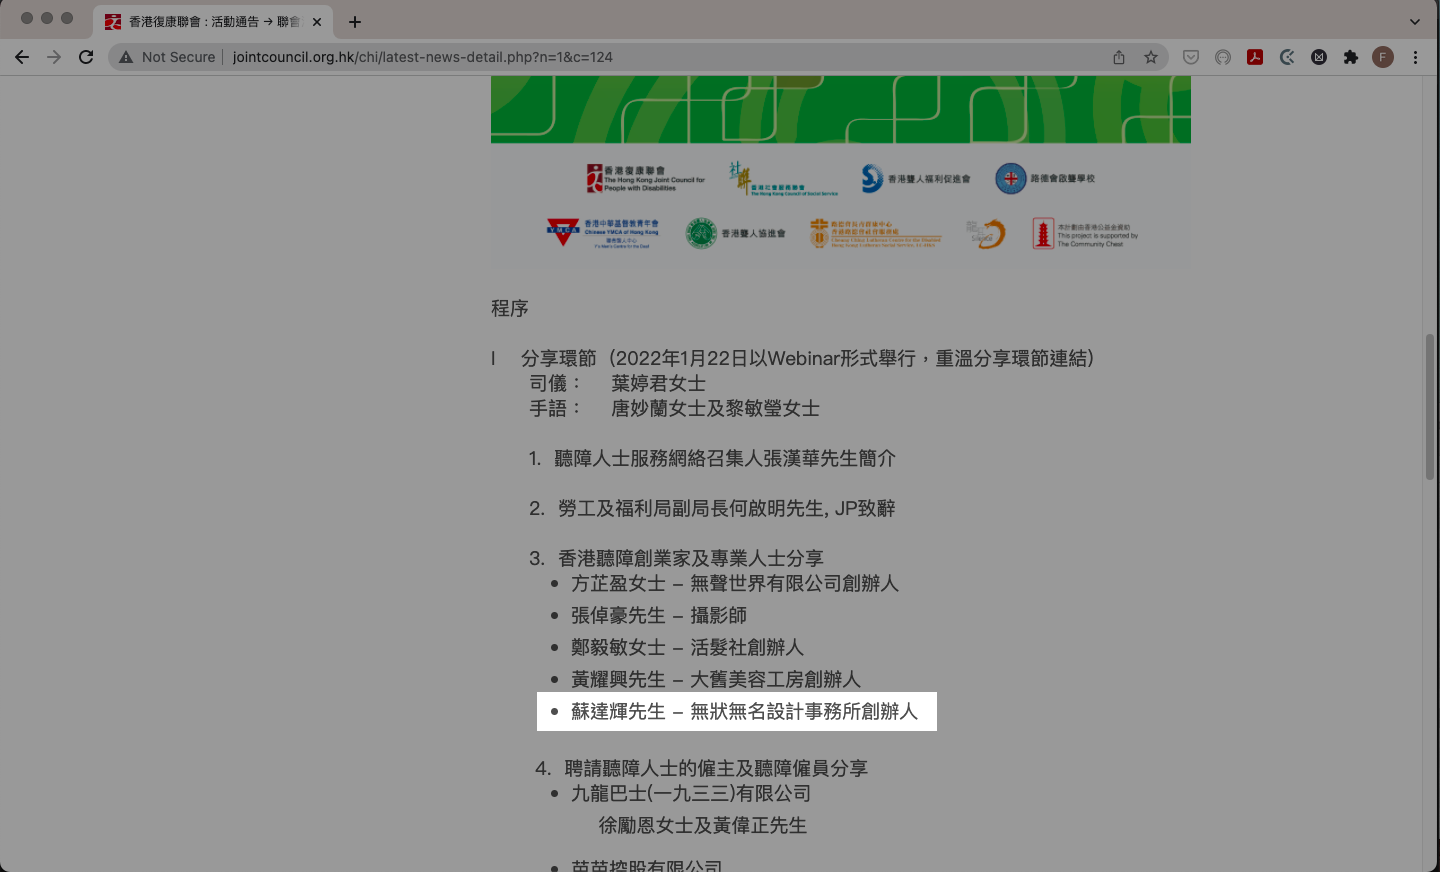 HKJCPWD-expo2022 frontpage-AS intro.png